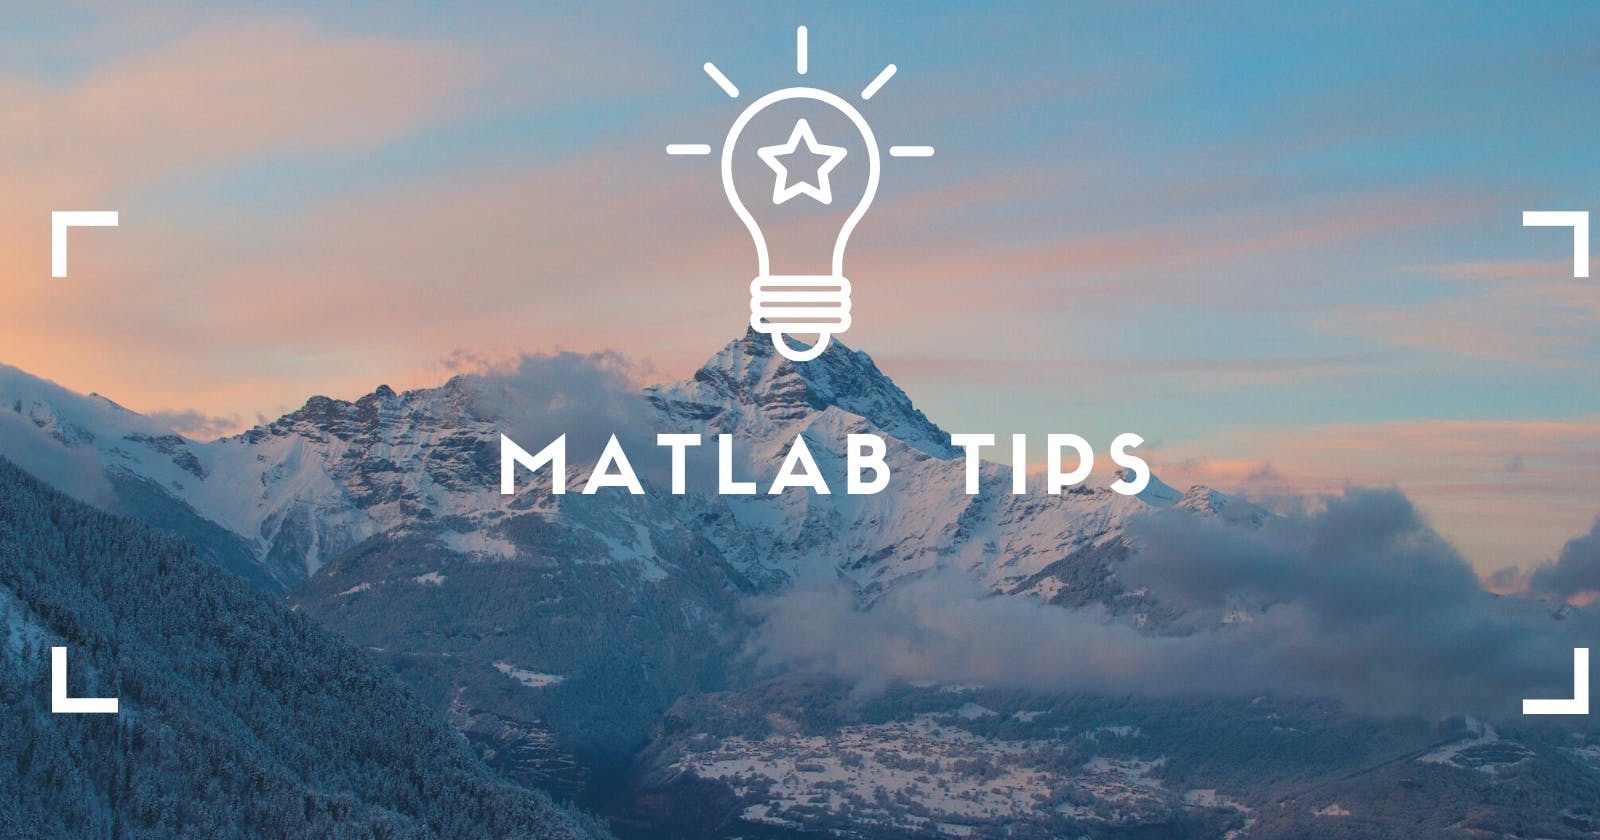 Handy MATLAB Tips for beginners: Syntax, variable names and more